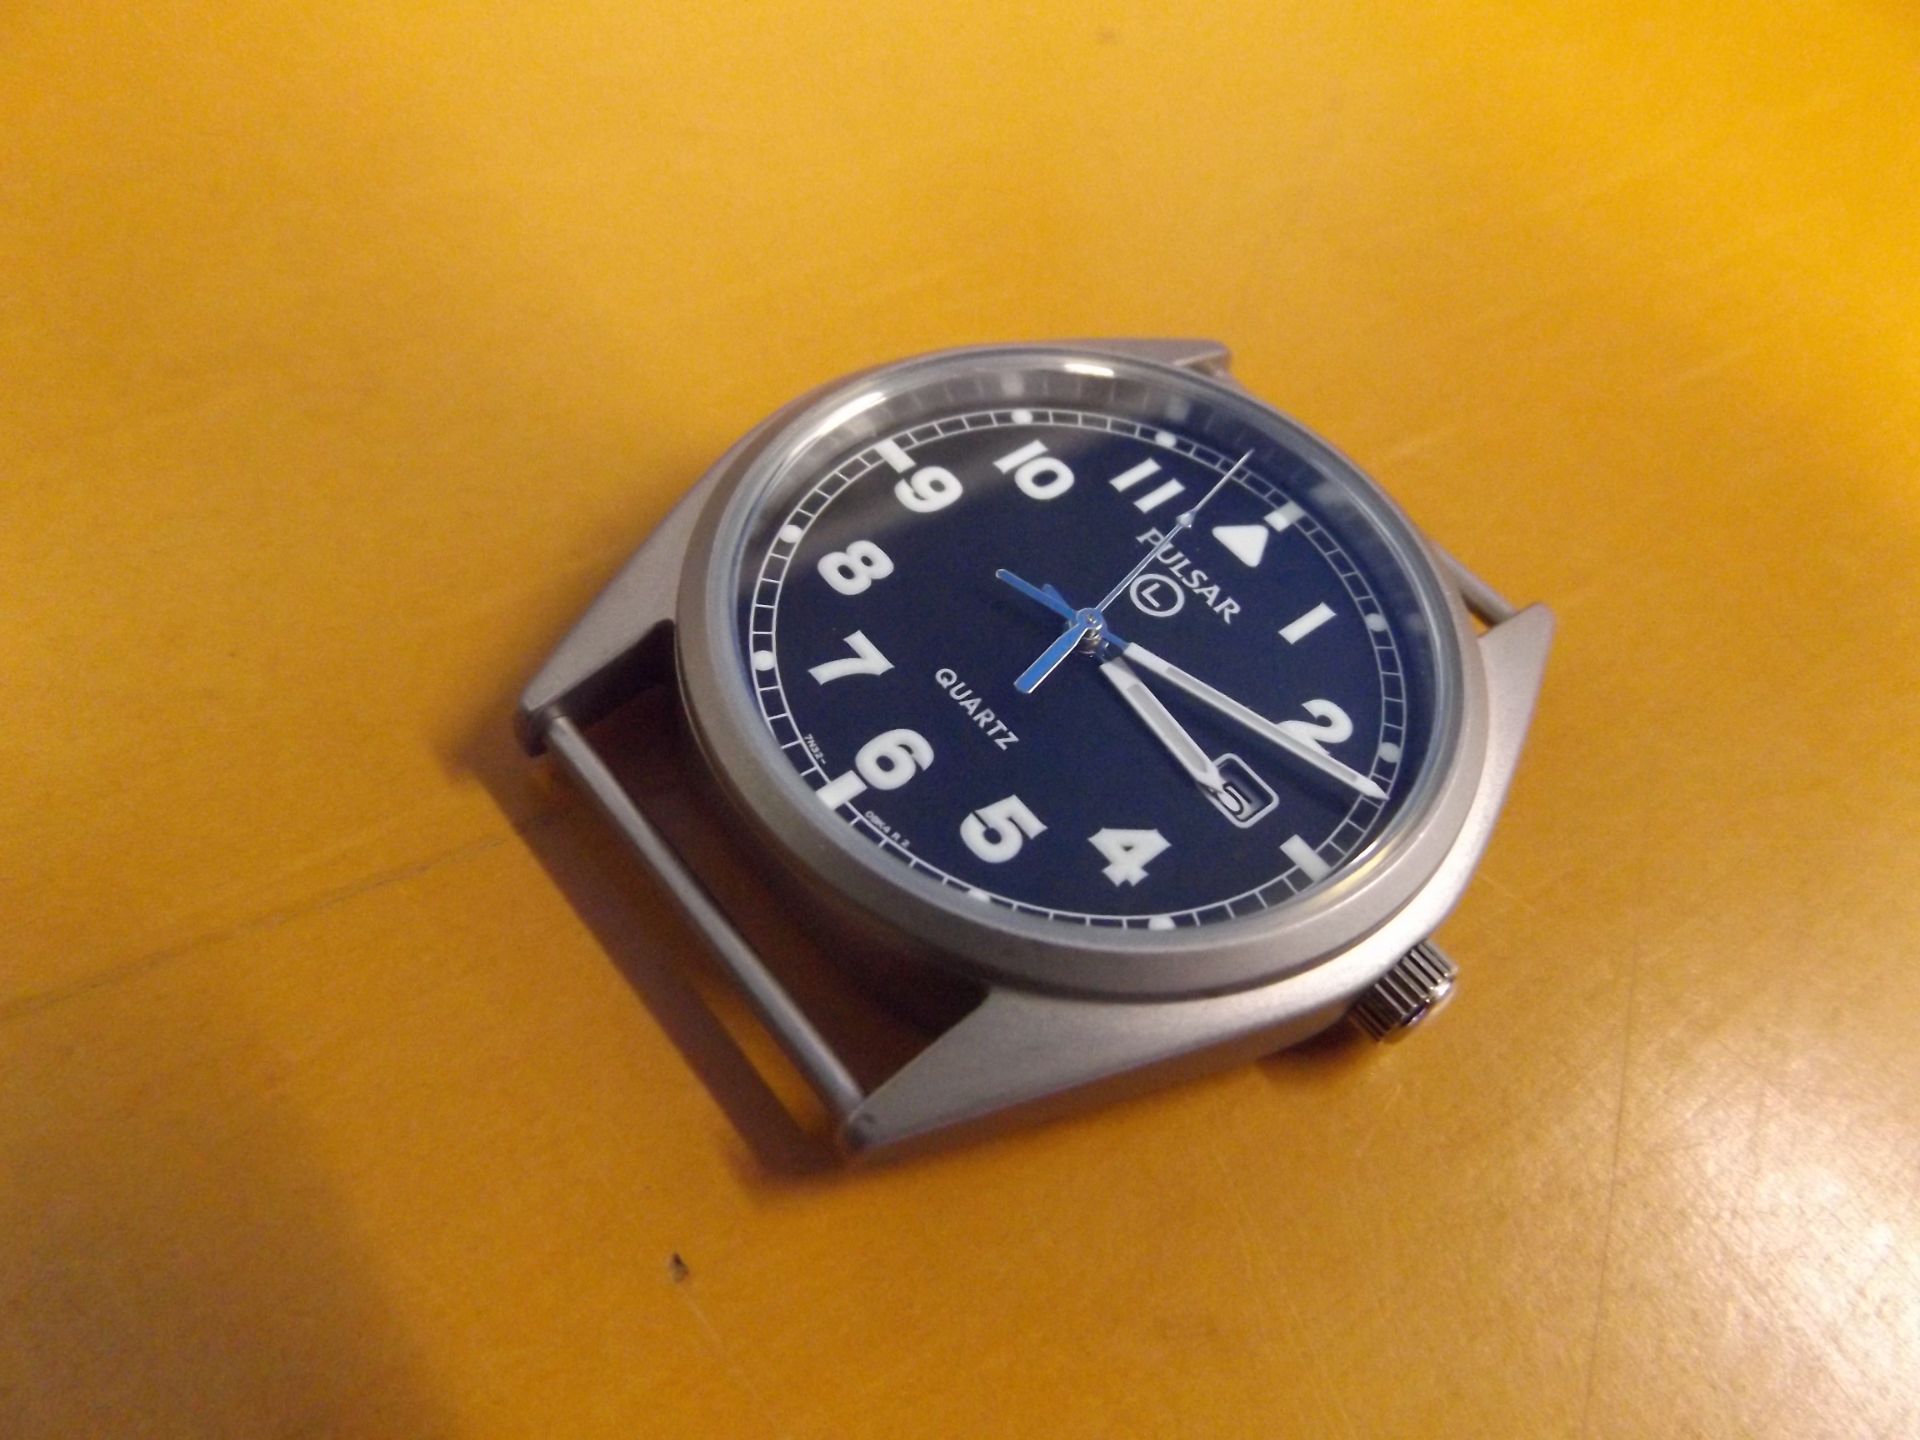 Unissued Pulsar G10 wrist watch - Afghan Issue - Image 5 of 7